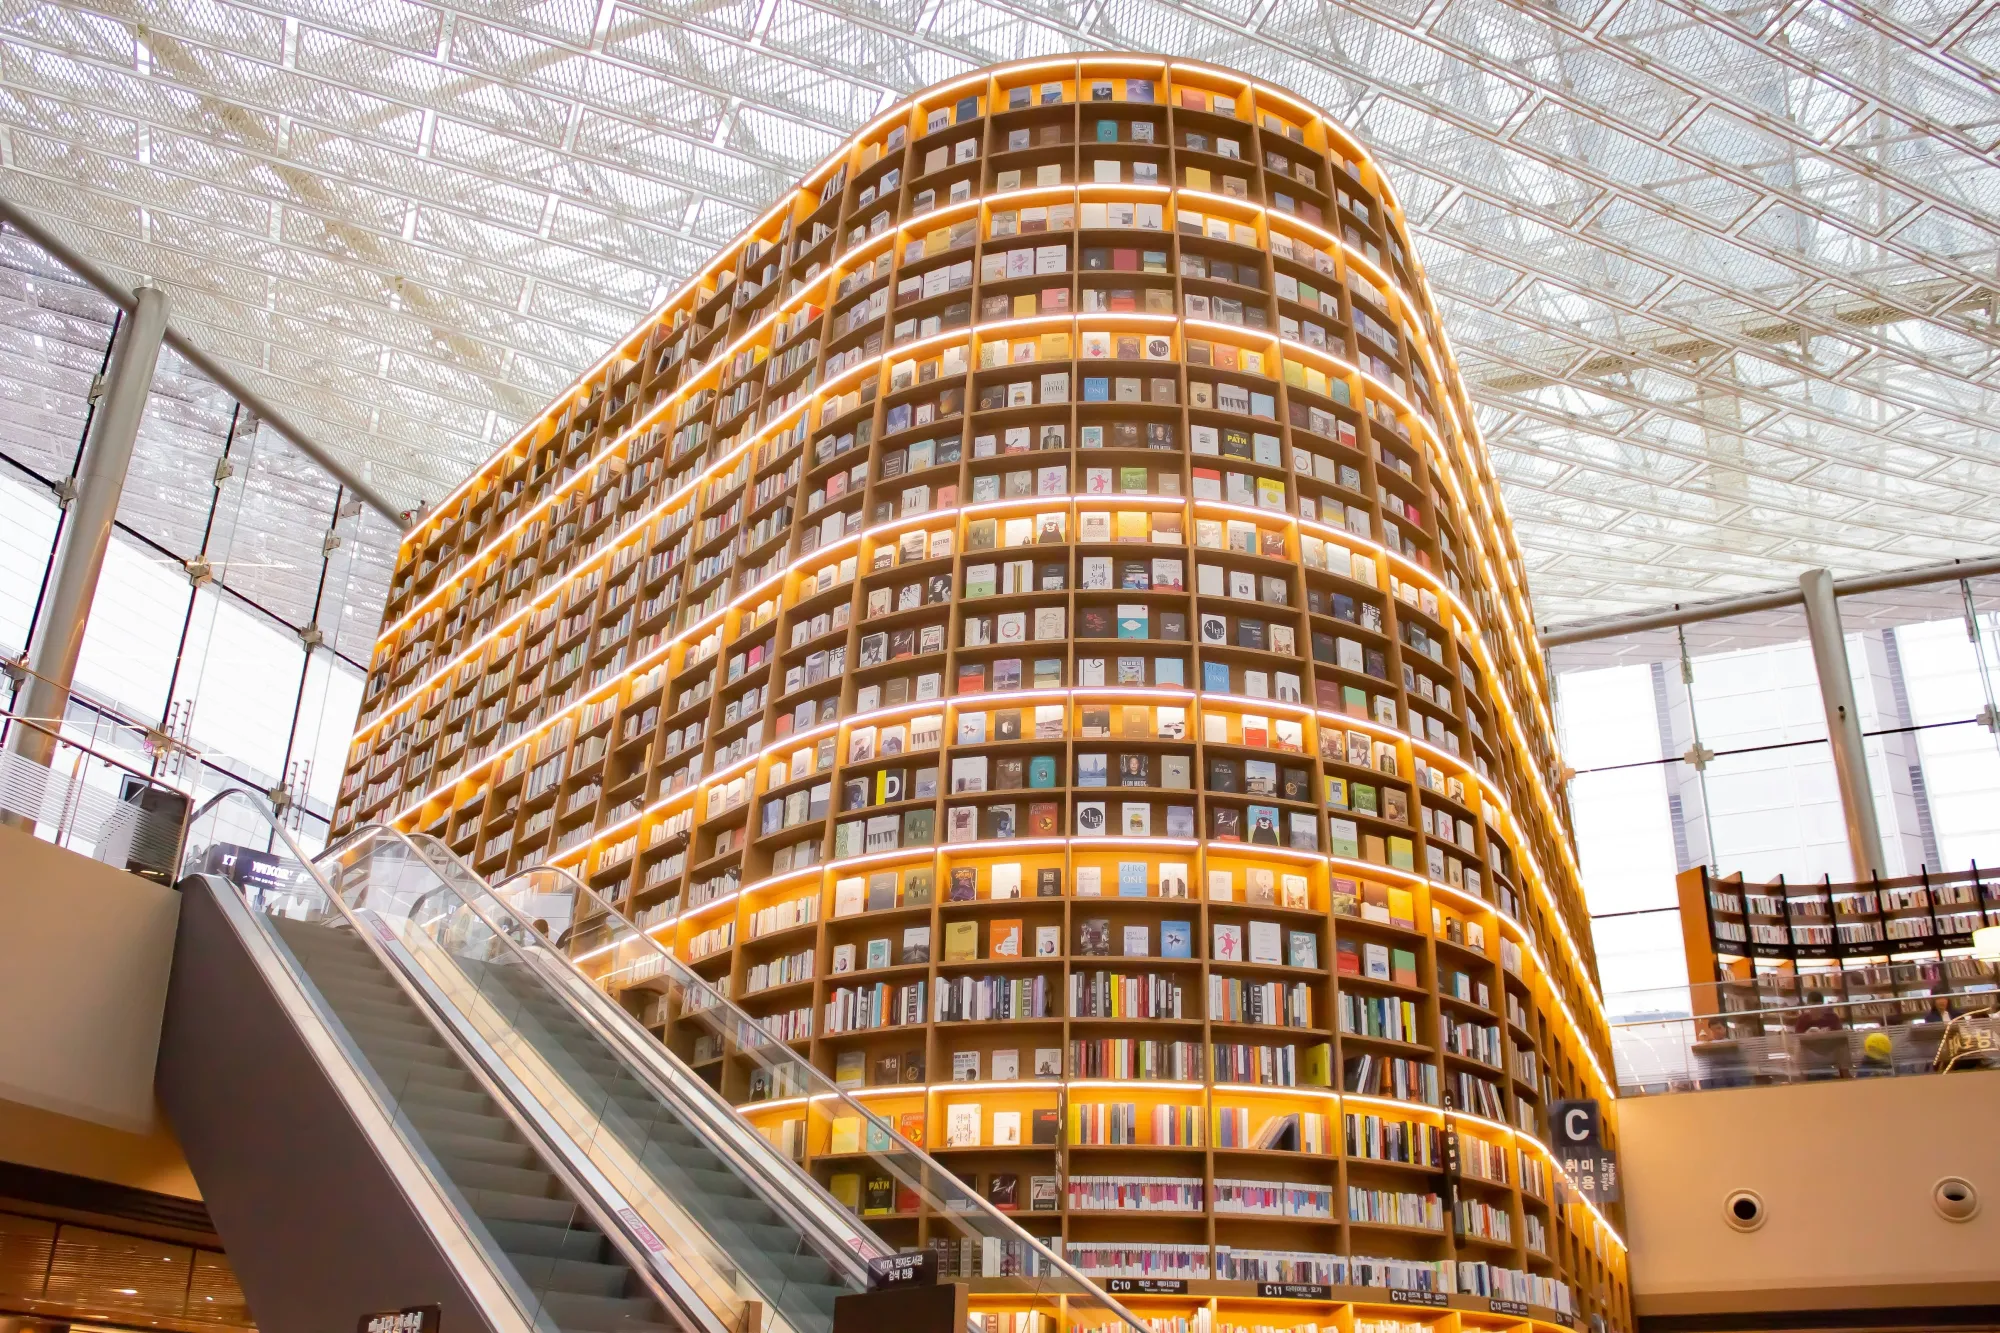 Modern library in South Korea